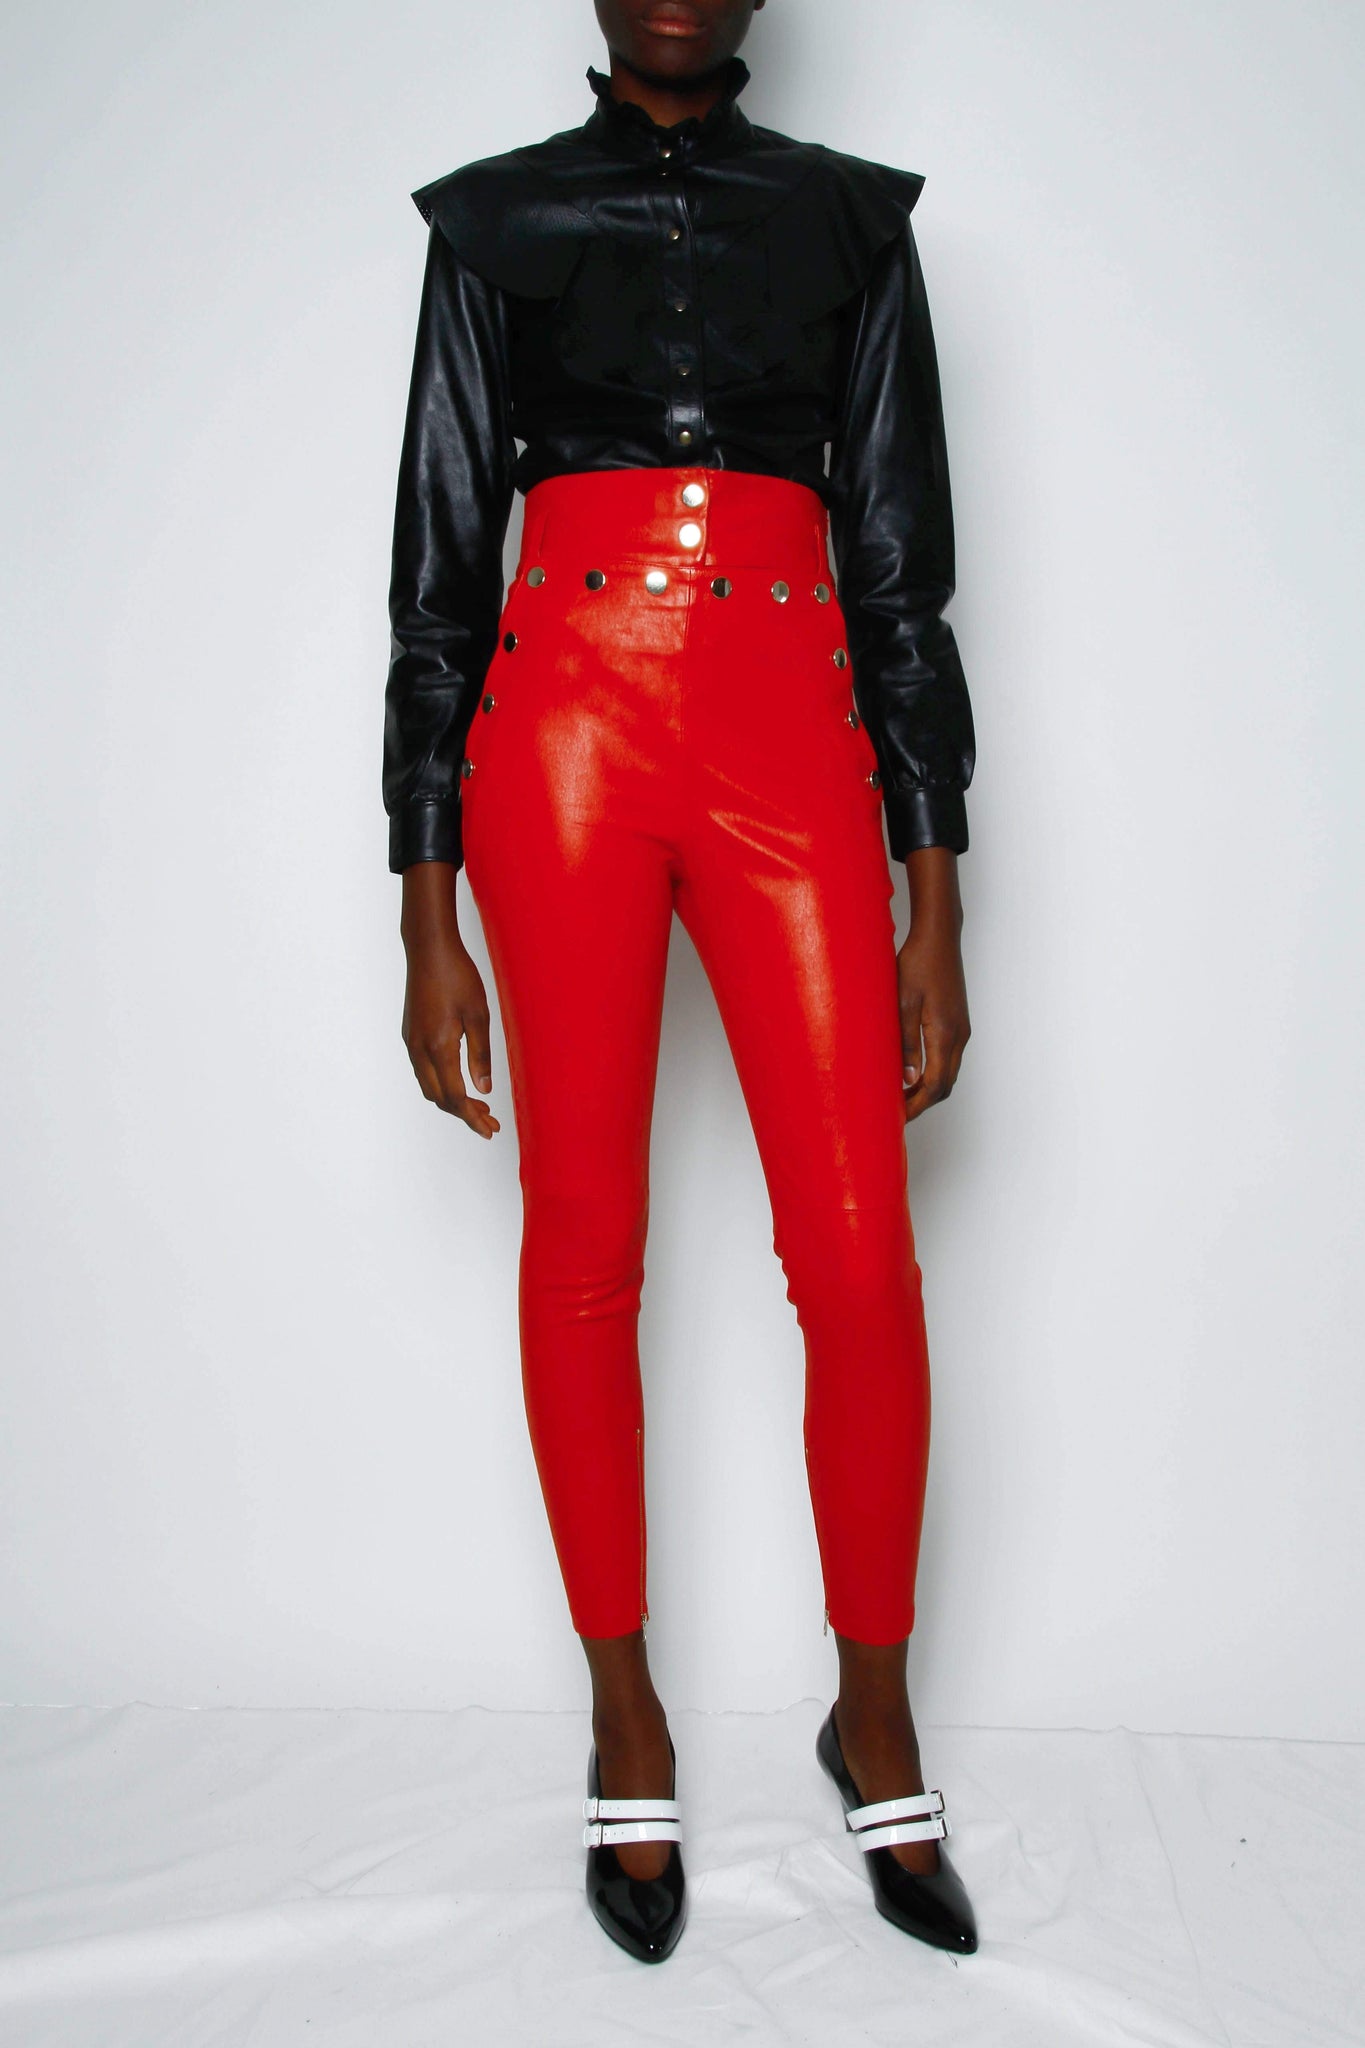 From Classic to Contemporary: The World of Men's Leather Trousers